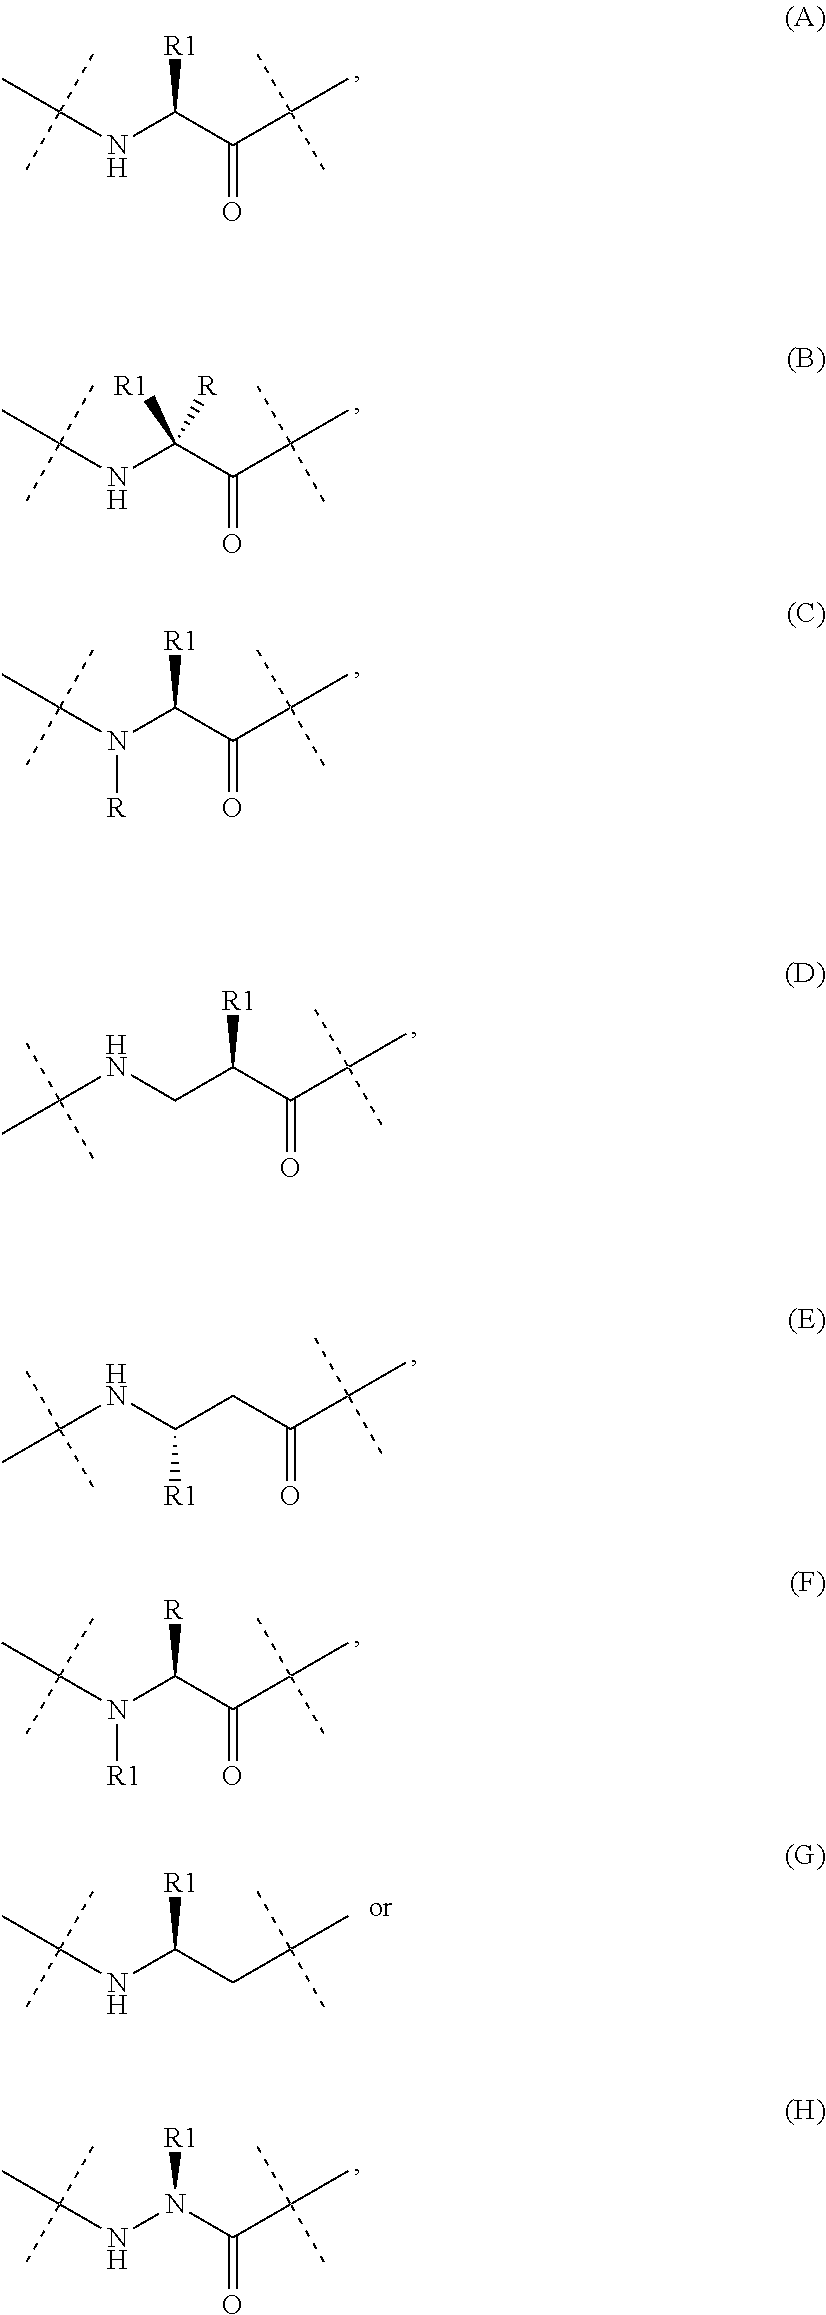 Long-acting y2 receptor agonists